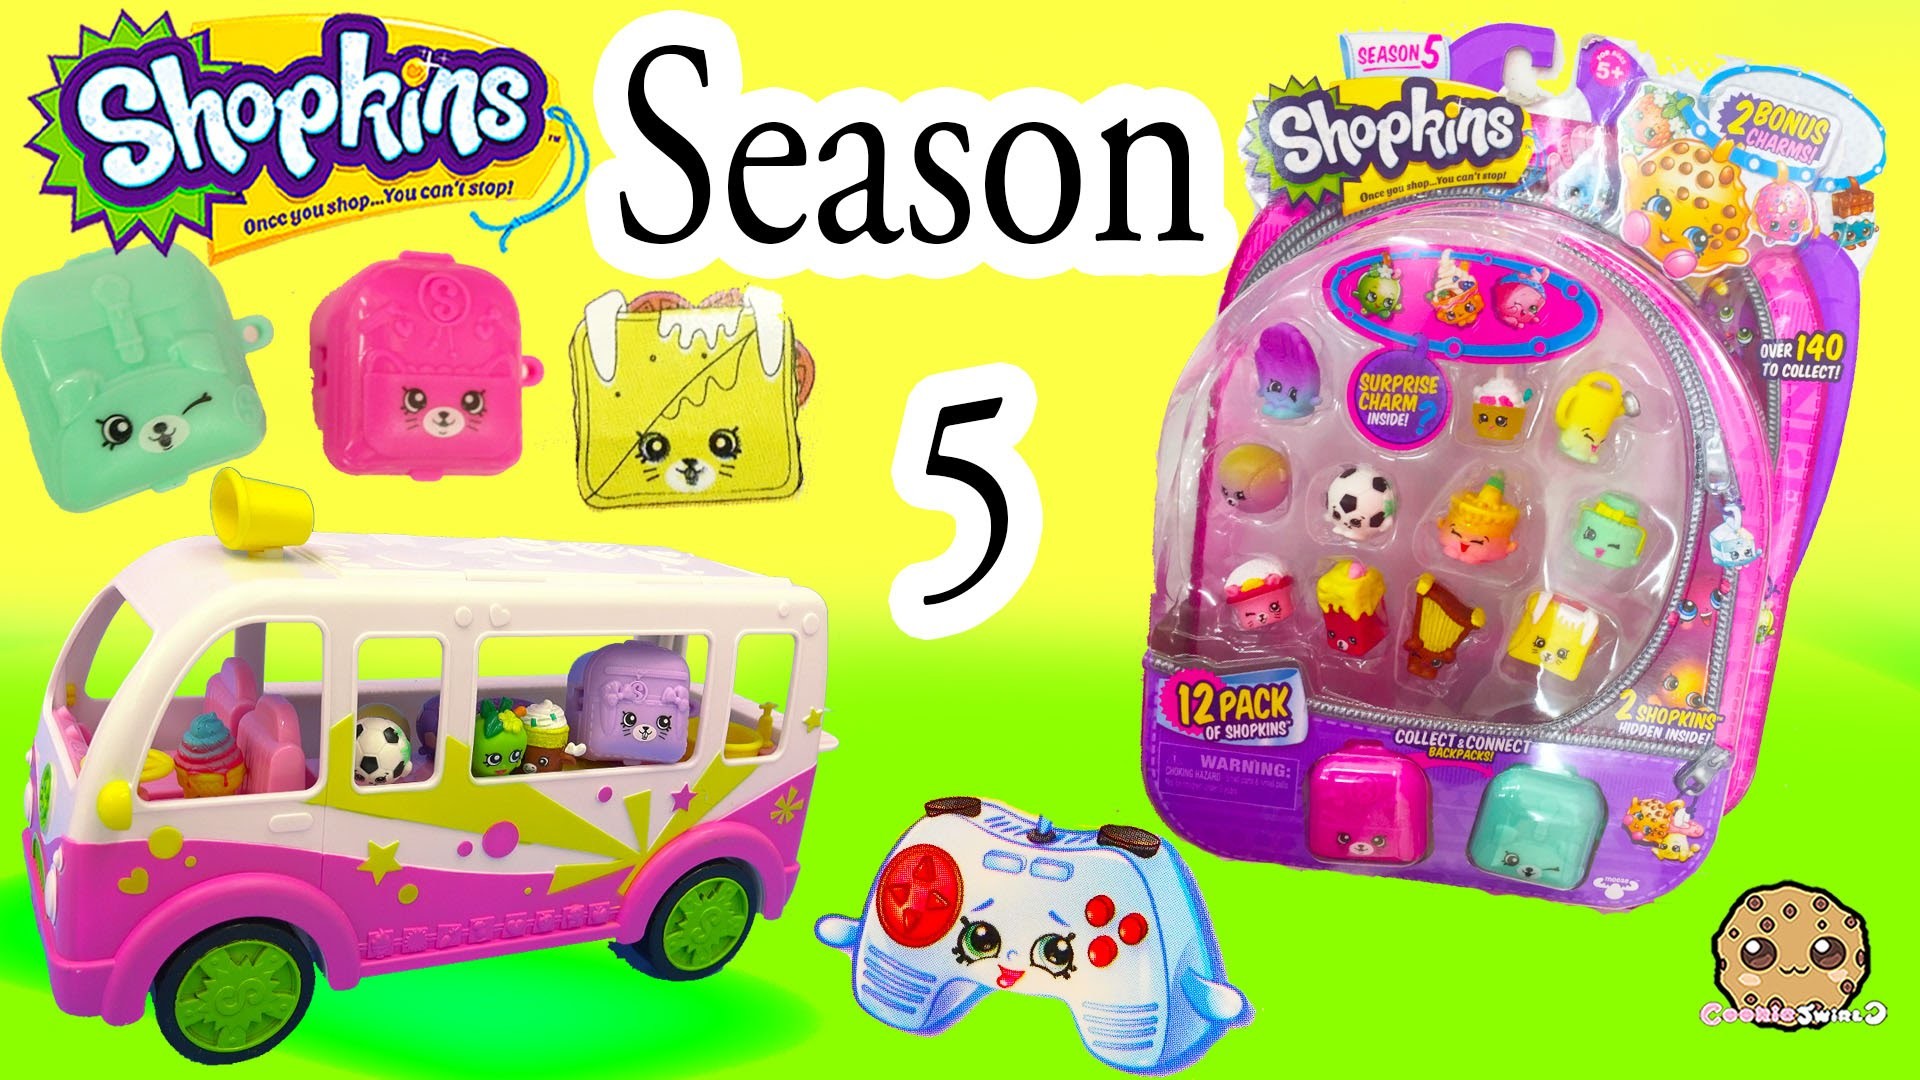 1920x1080 Season 5 Shopkins 12 Pack with Glow In The Dark Surprise Blind Bag + Charms  - Video Cookieswirlc - YouTube